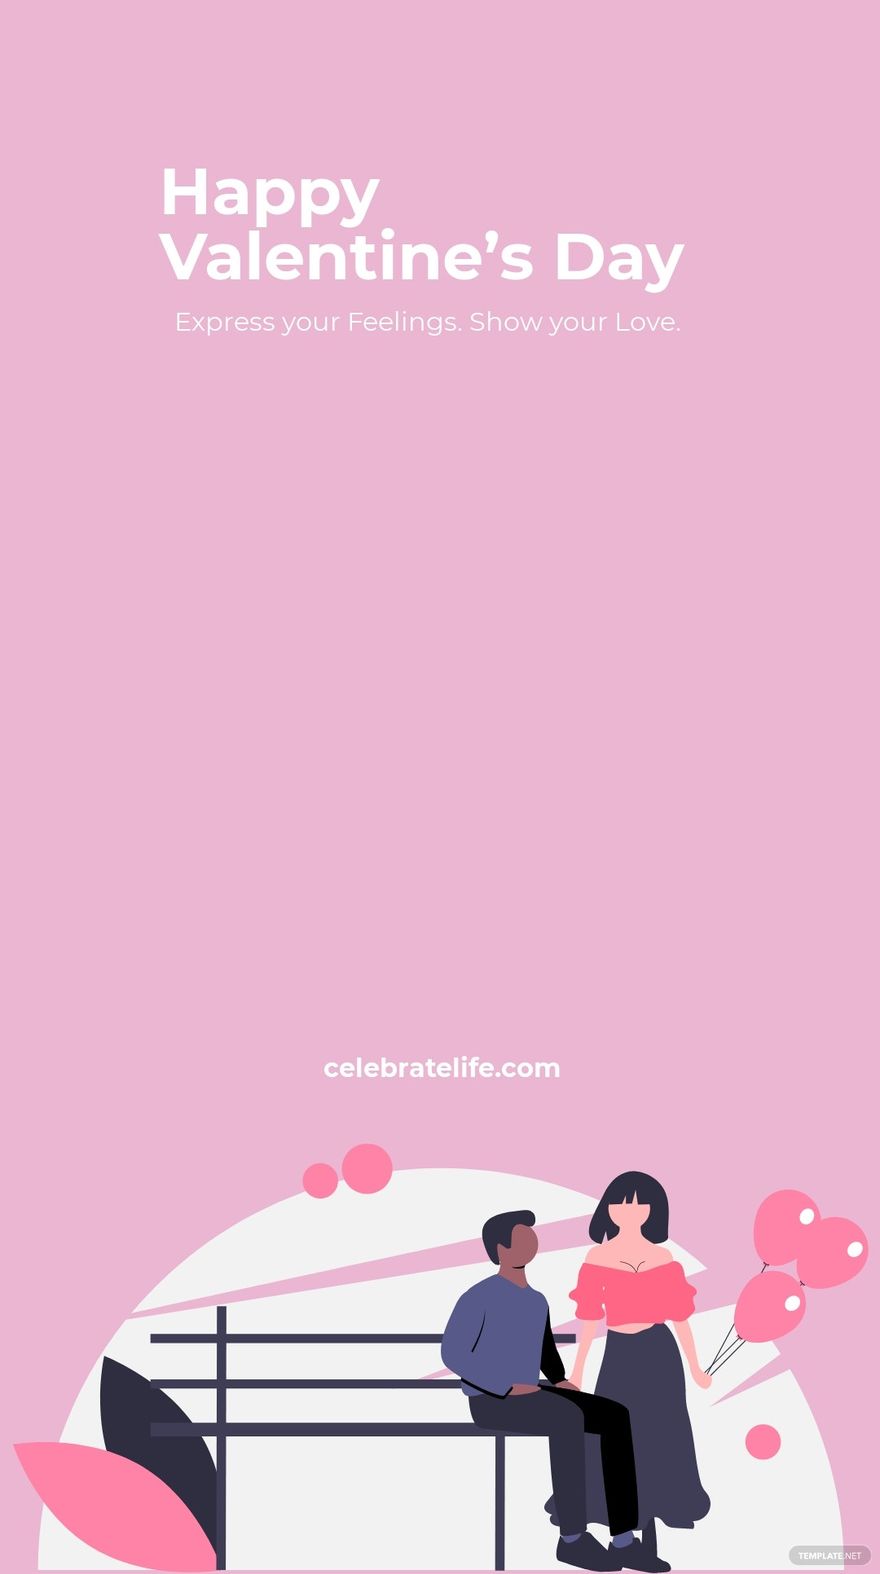 Happy Valentine's Day Snapchat Geofilter Template